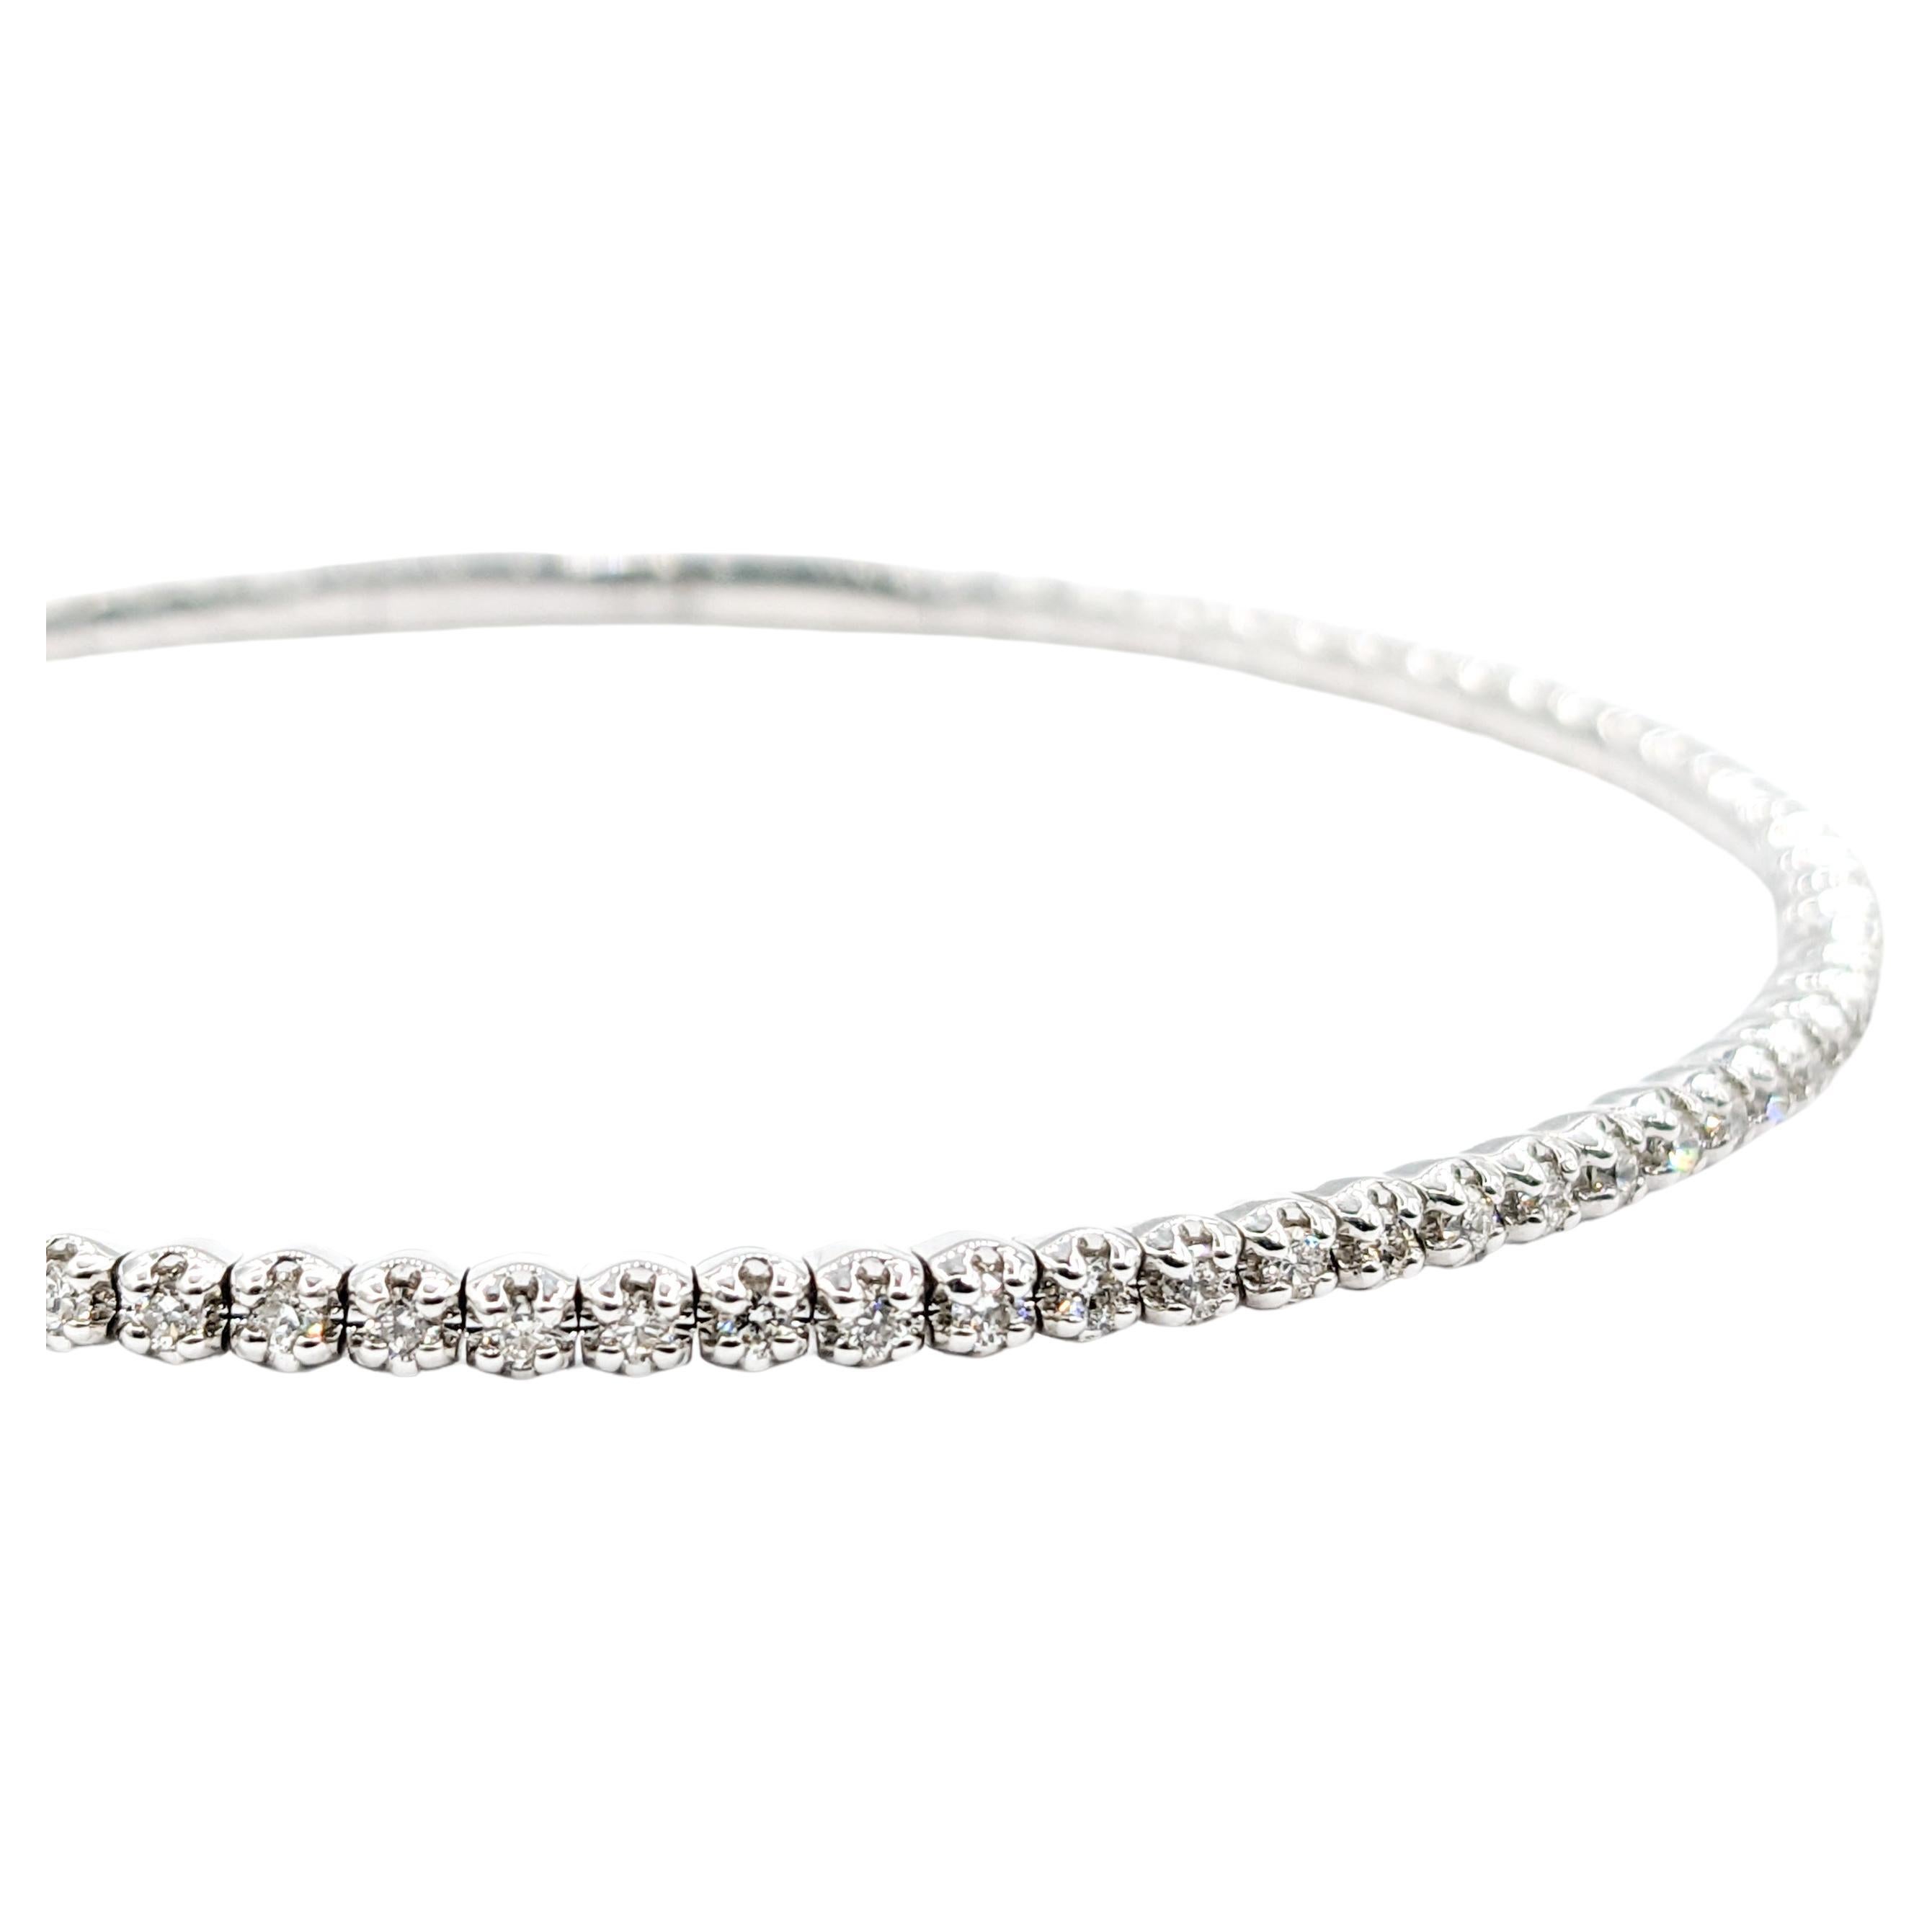 .95ctw Diamond Flex Bracelet White Gold

Discover elegance with our stunning bracelet, masterfully crafted in 14kt white gold and adorned with 0.95ctw of flexible diamonds. These sparkling gems boast SI-I clarity and a near colorless hue, radiating